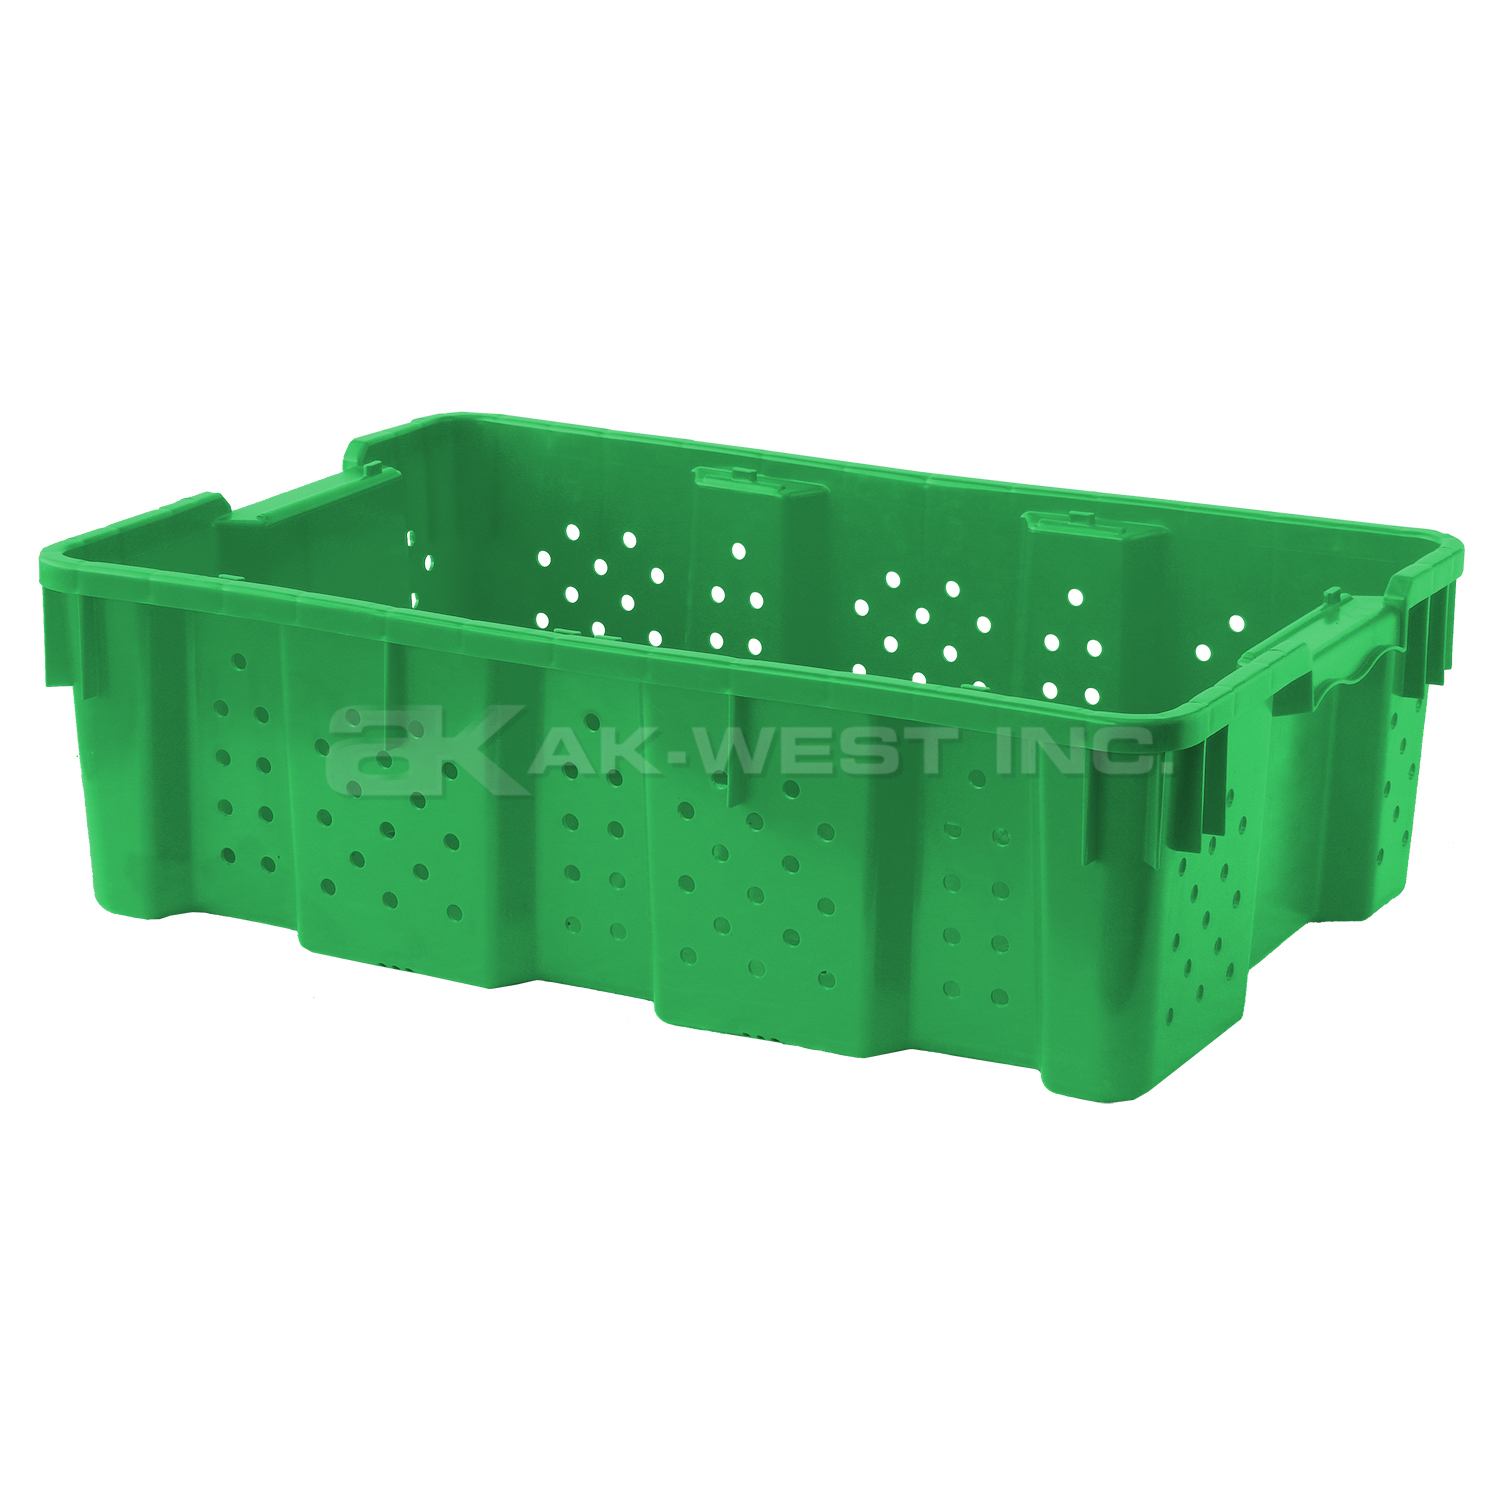 Green, 24"L x 16"W x 7"H Stack and Nest Container w/ Vented Sides and Base